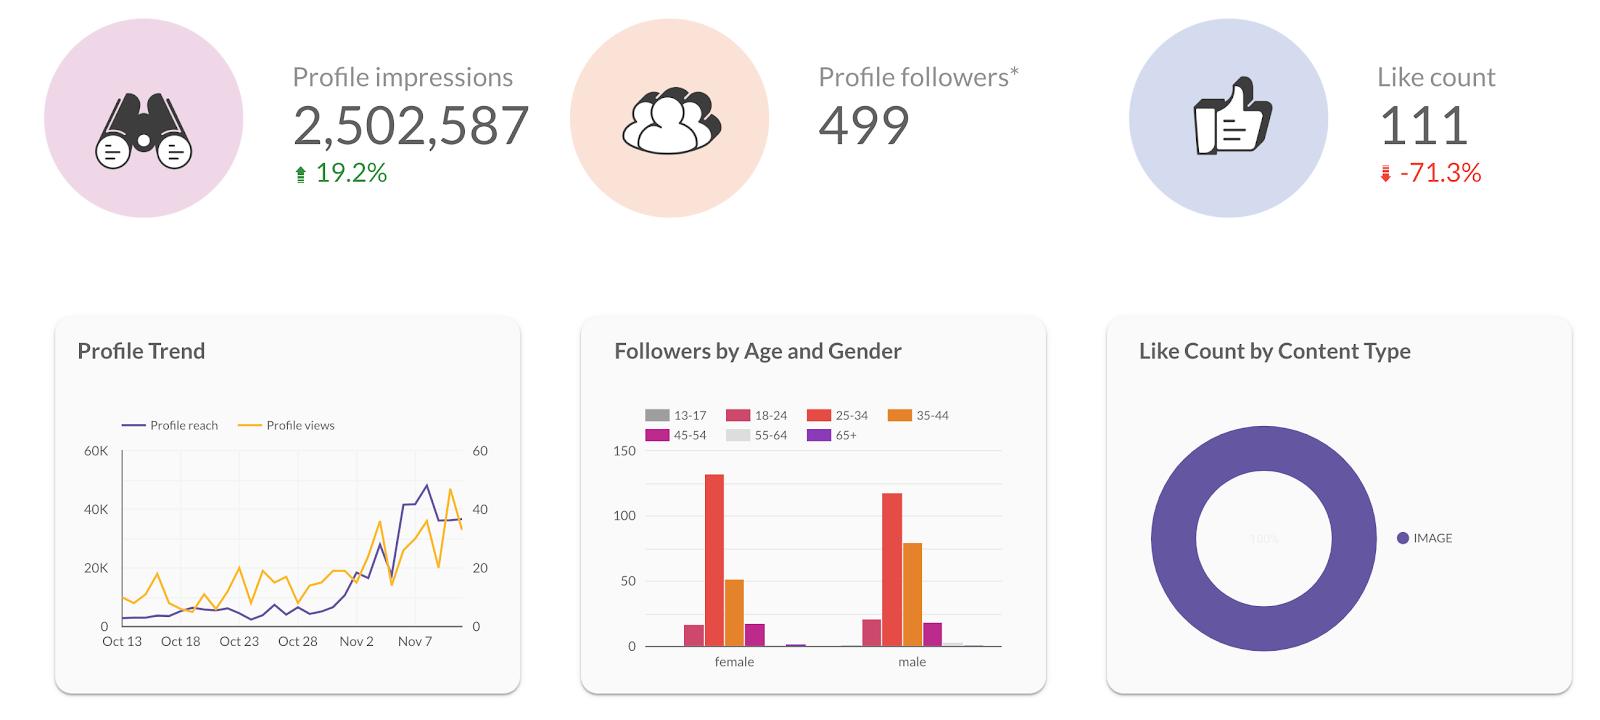 marketing dashboard for social media showing data about impressions, followers, and likes